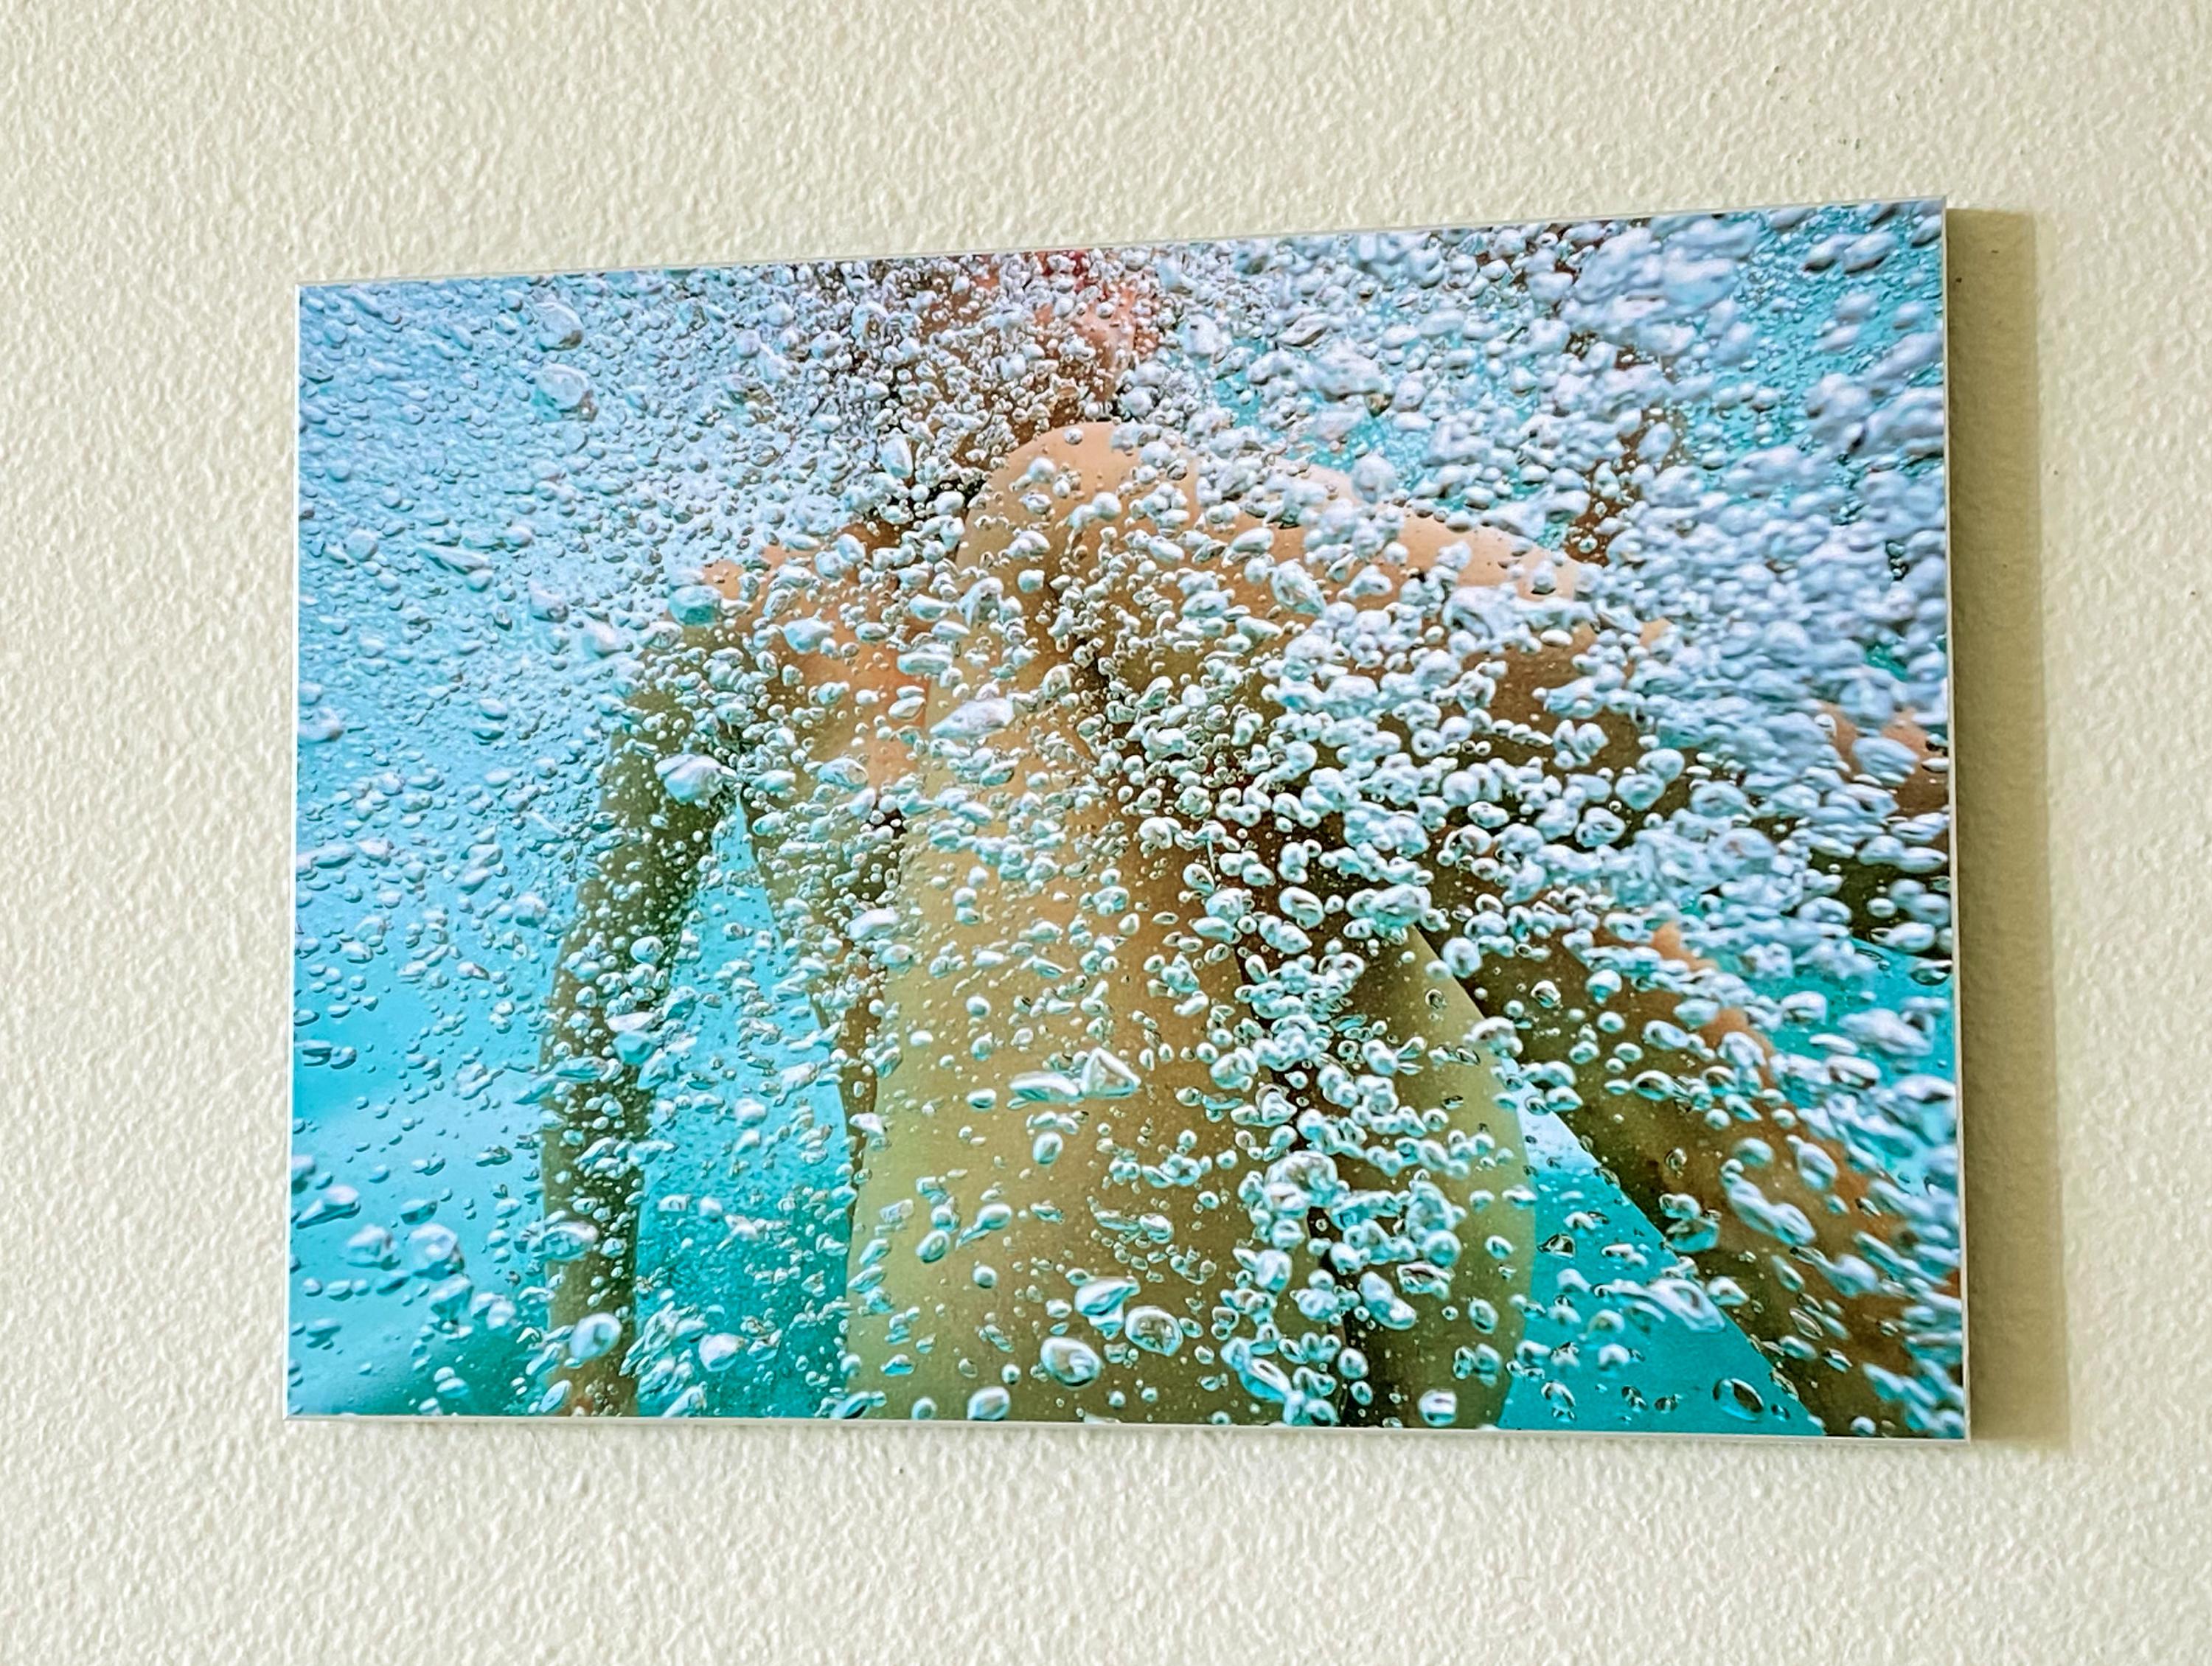 Hot Champagne  - underwater nude photograph - print on aluminum 8 x 12